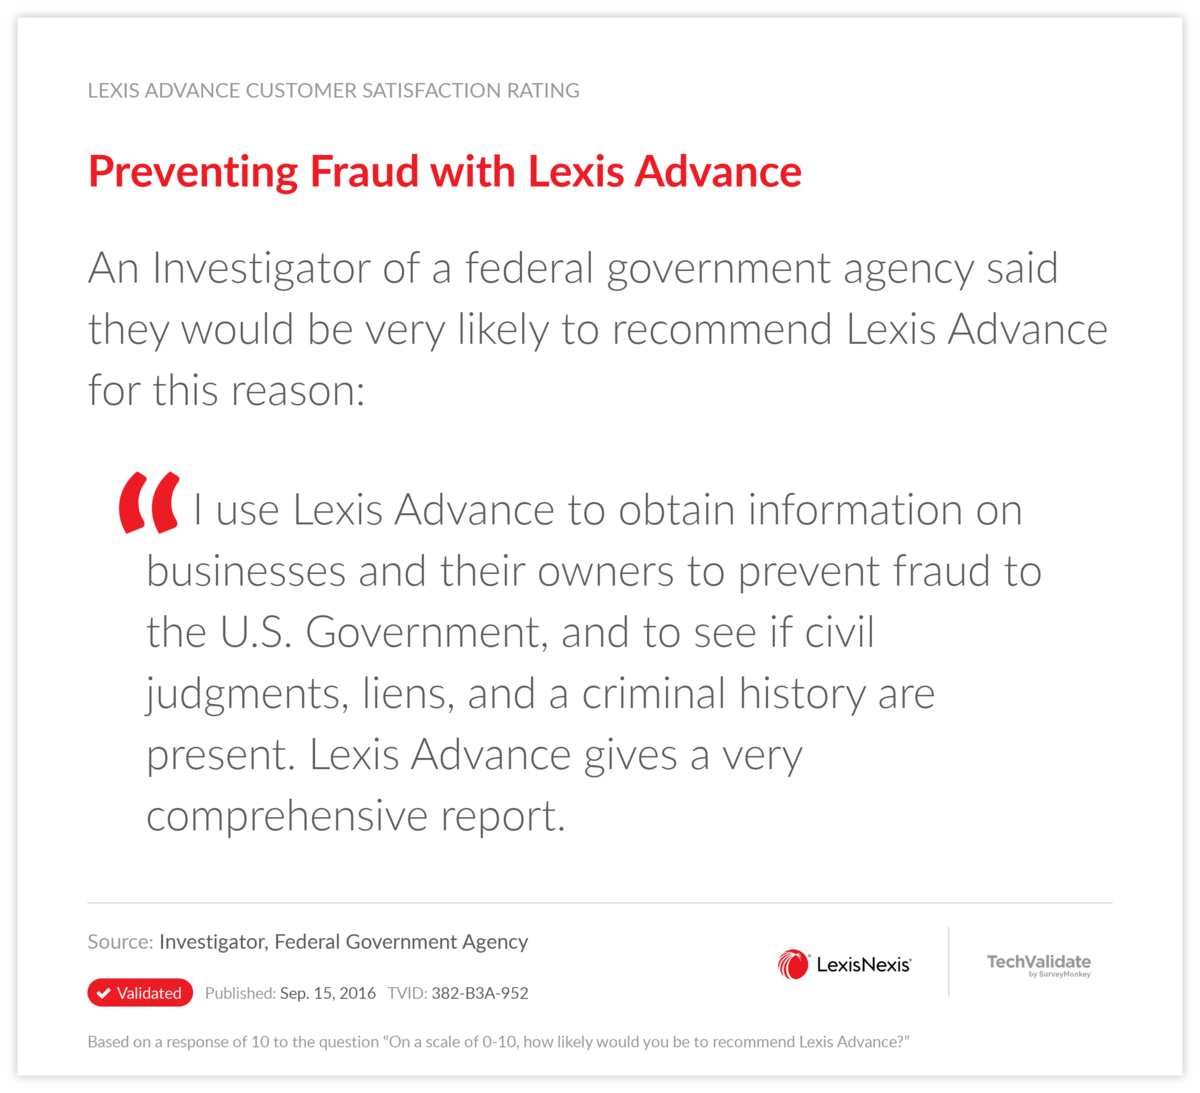 Preventing Fraud with Lexis Advance